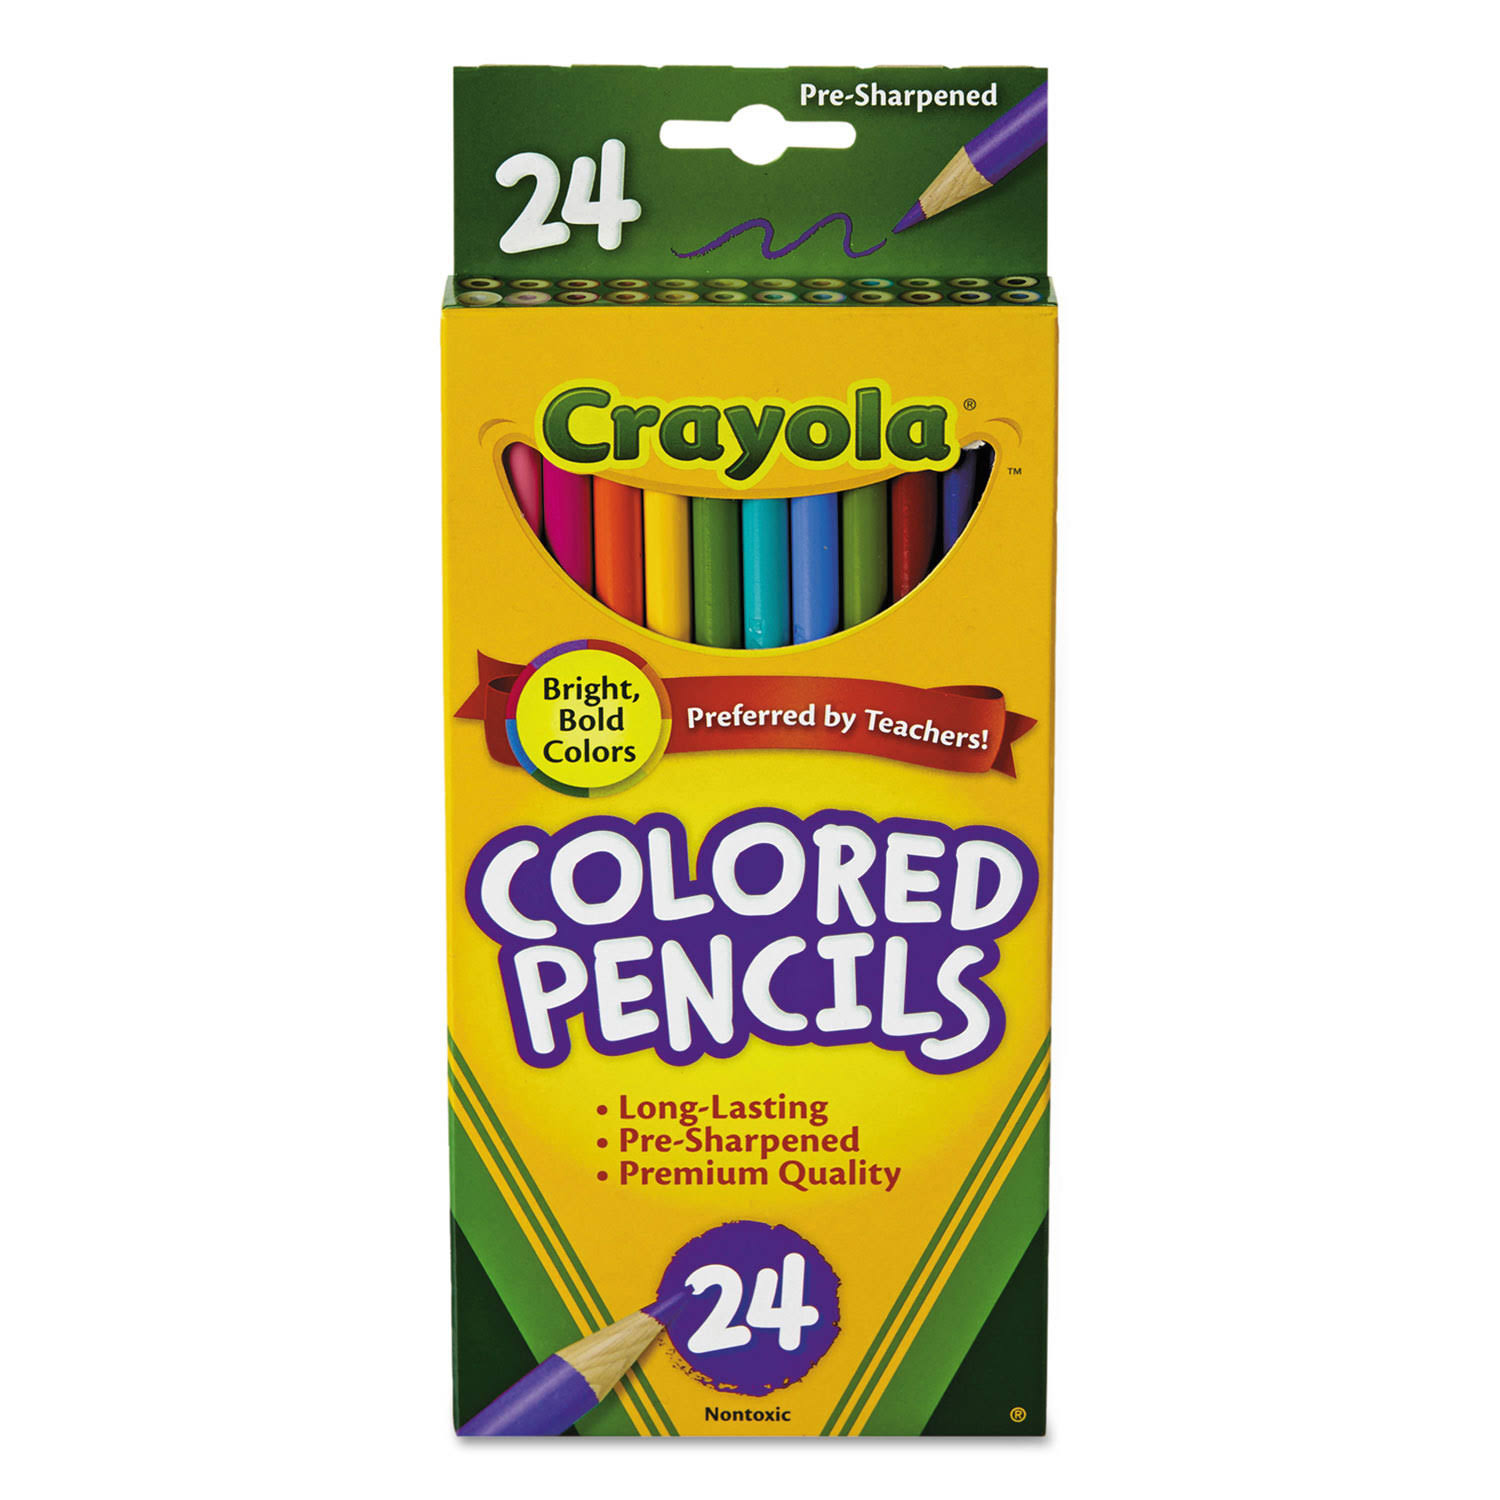 Crayola Colored Pencils - Assorted Colors, 24 Count